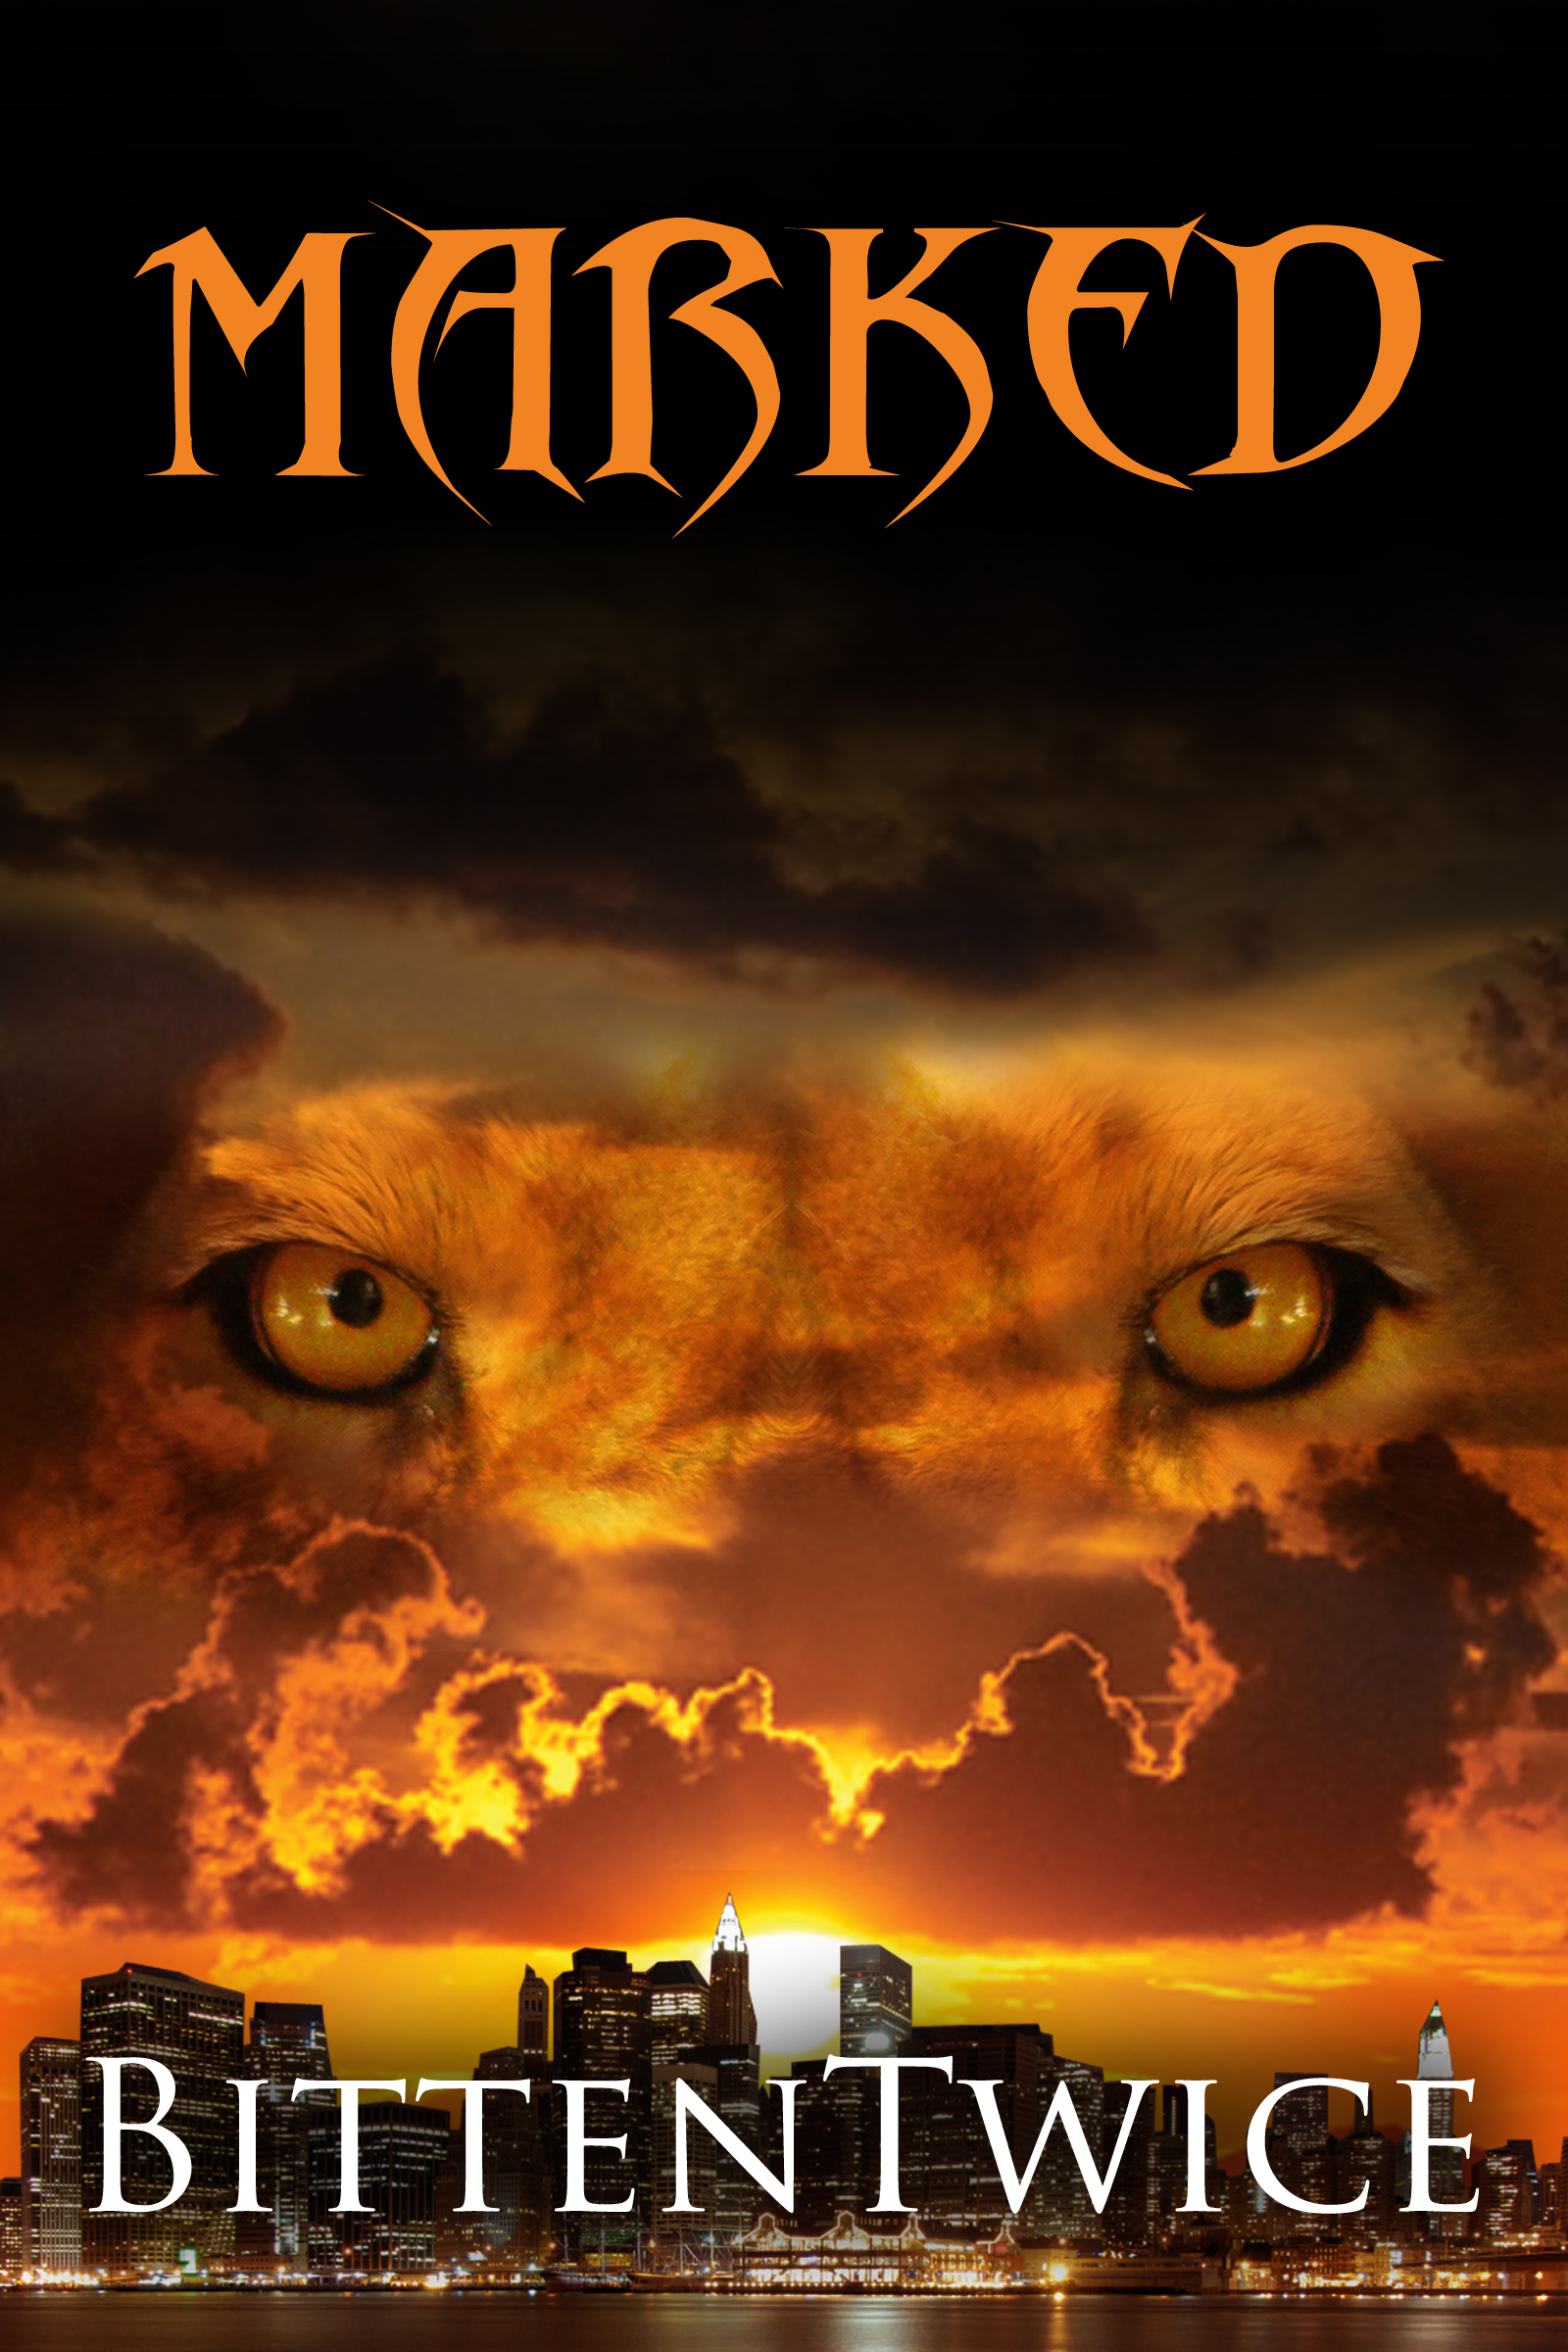 bookcover image shows the eyes of a lion peering through an orange sunset over the Manhatten skyline